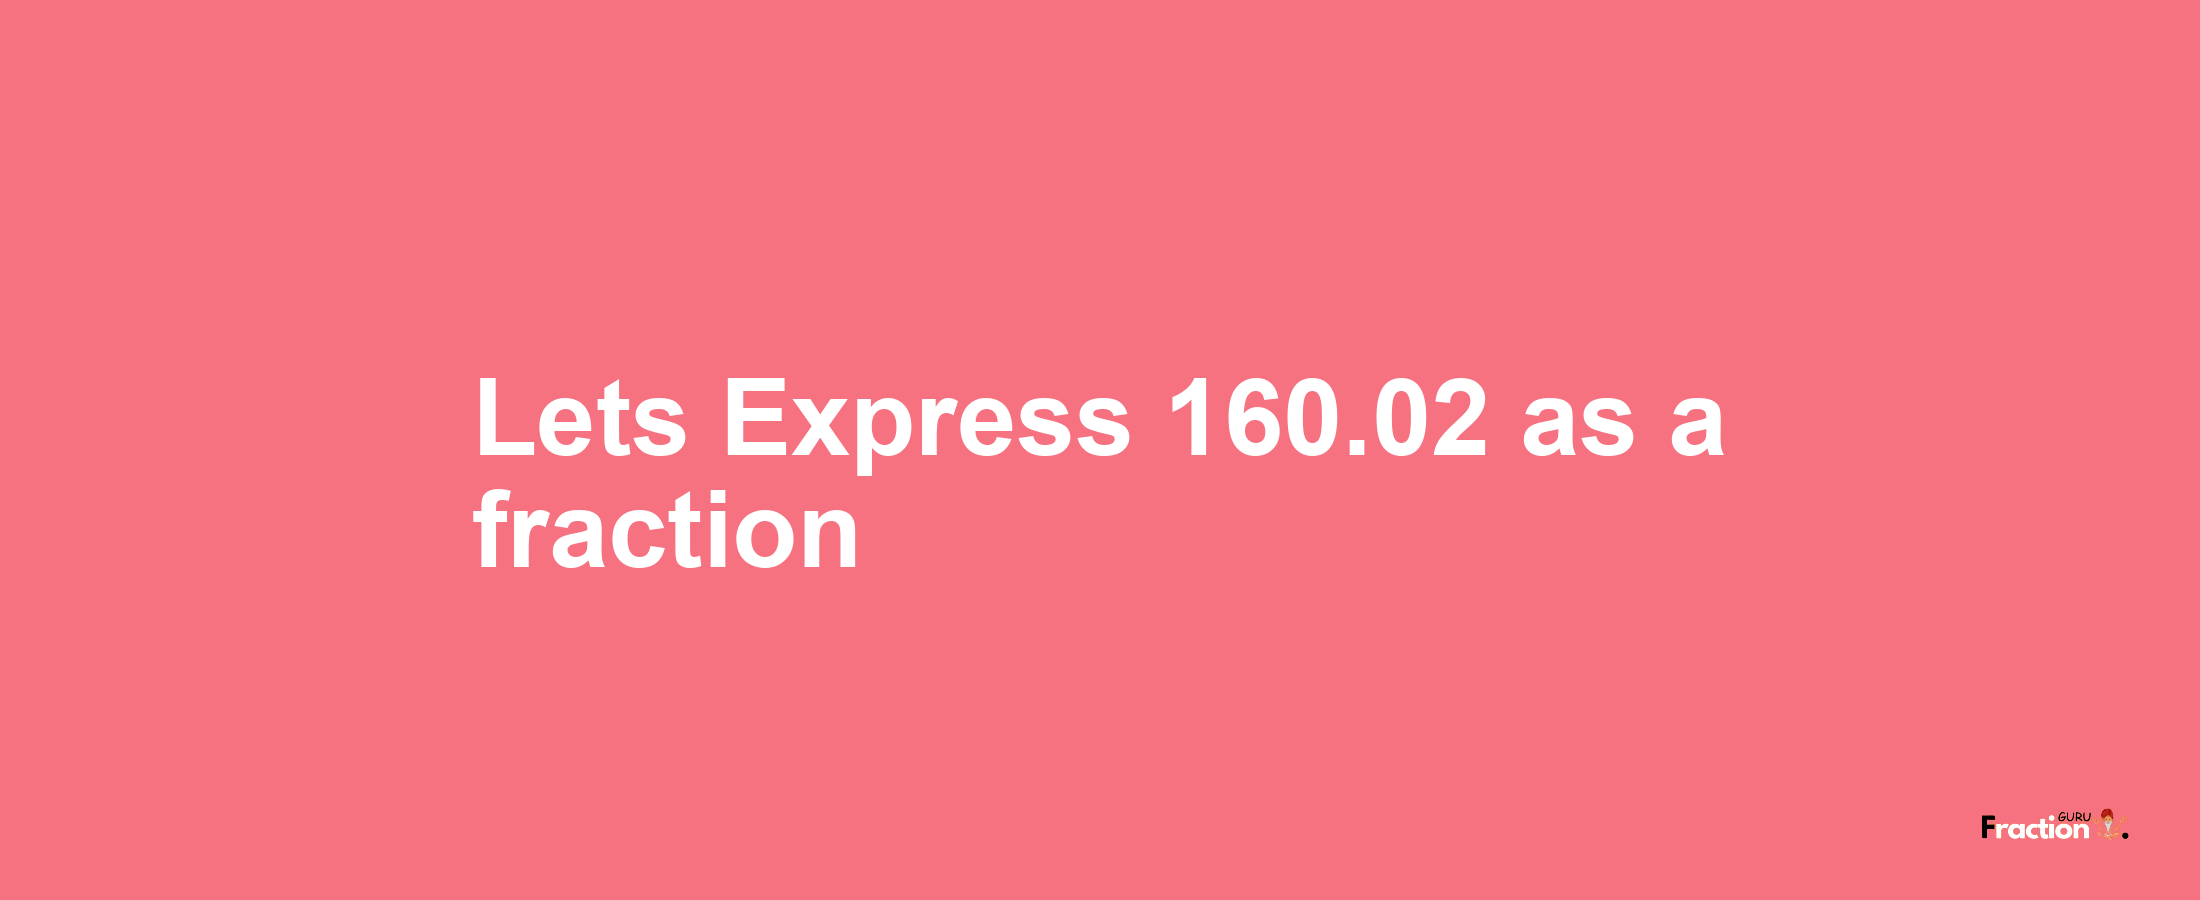 Lets Express 160.02 as afraction